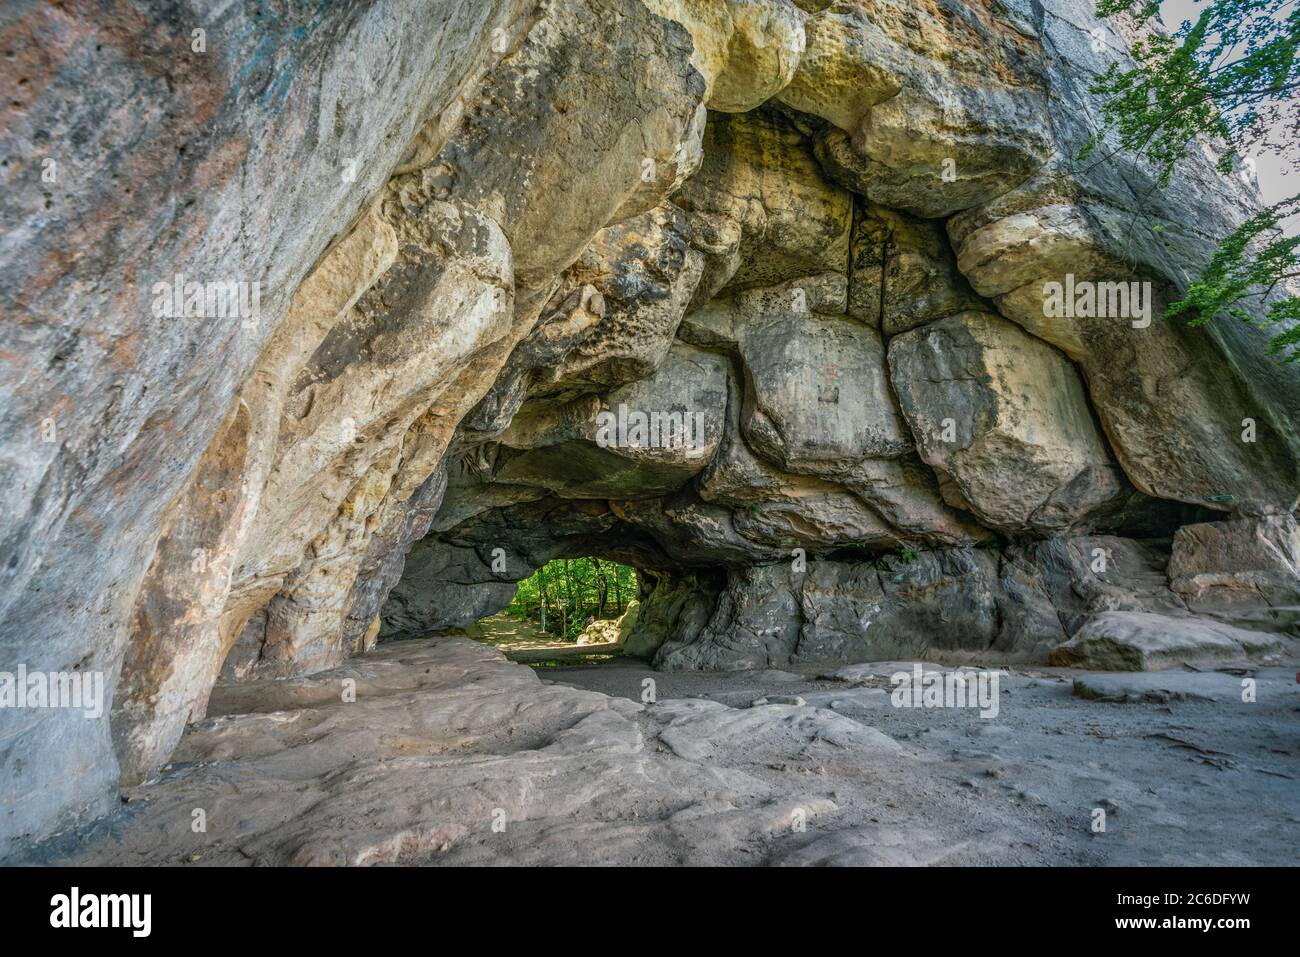 Famous Kuhstall rock formation near Bad Schandau at the Saxon Switzerland National Park in Germany Stock Photo